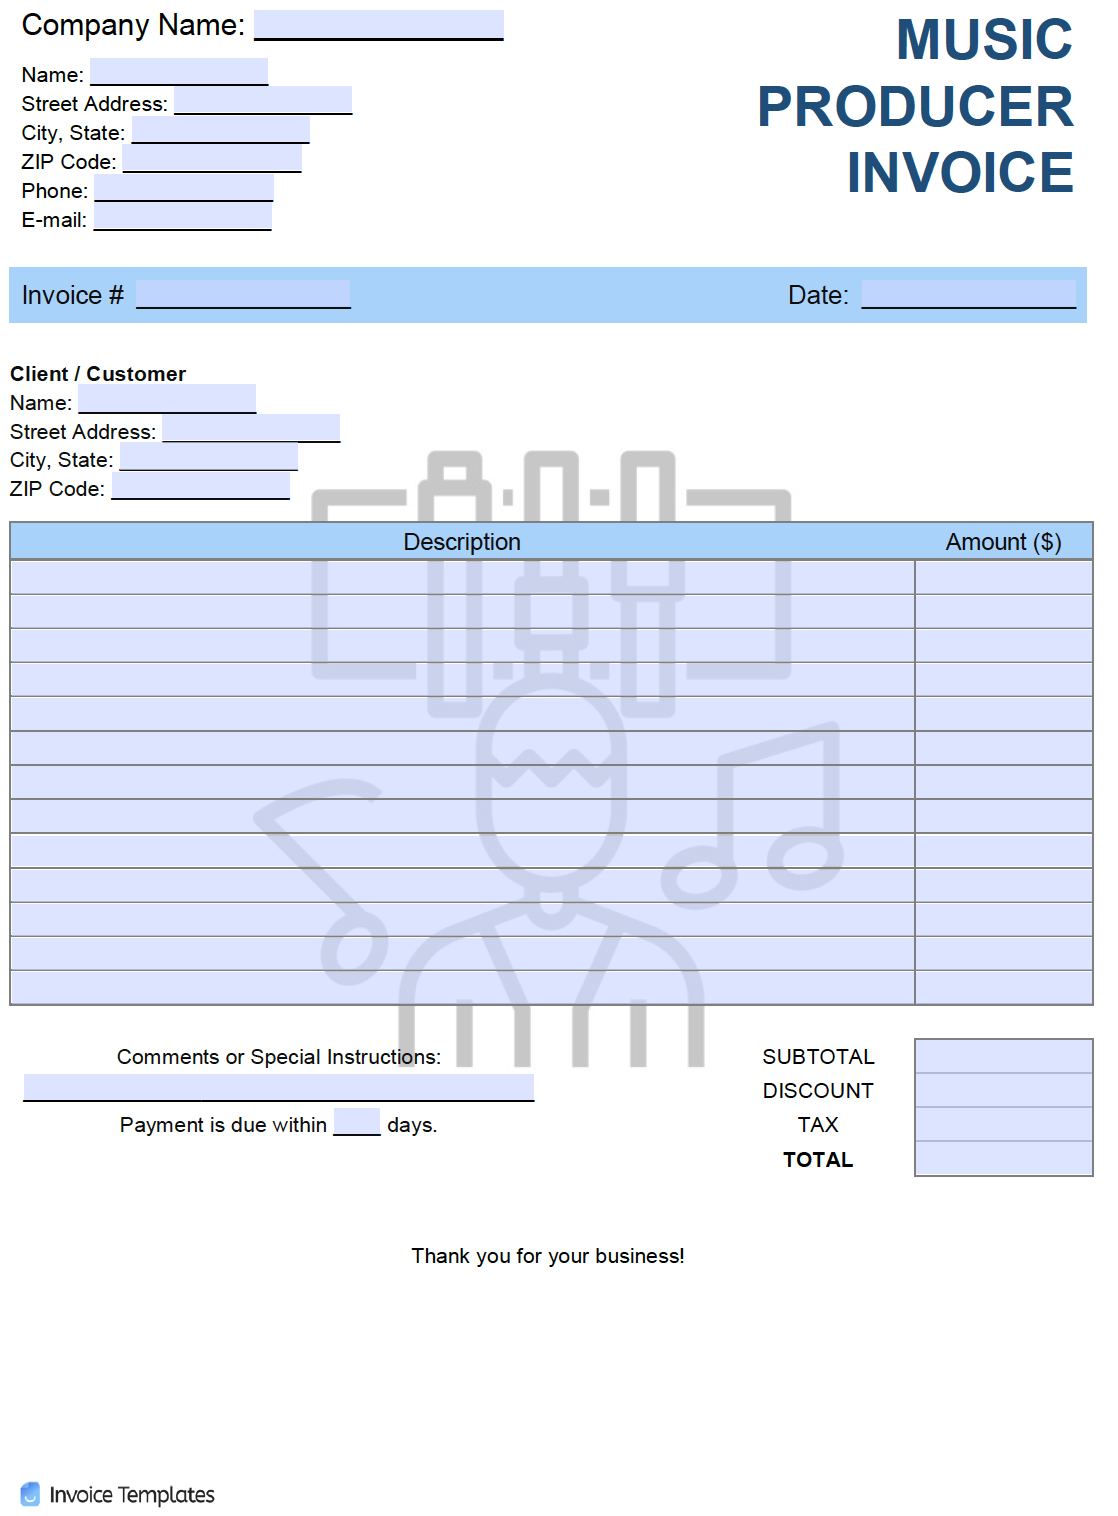 production-invoice-template